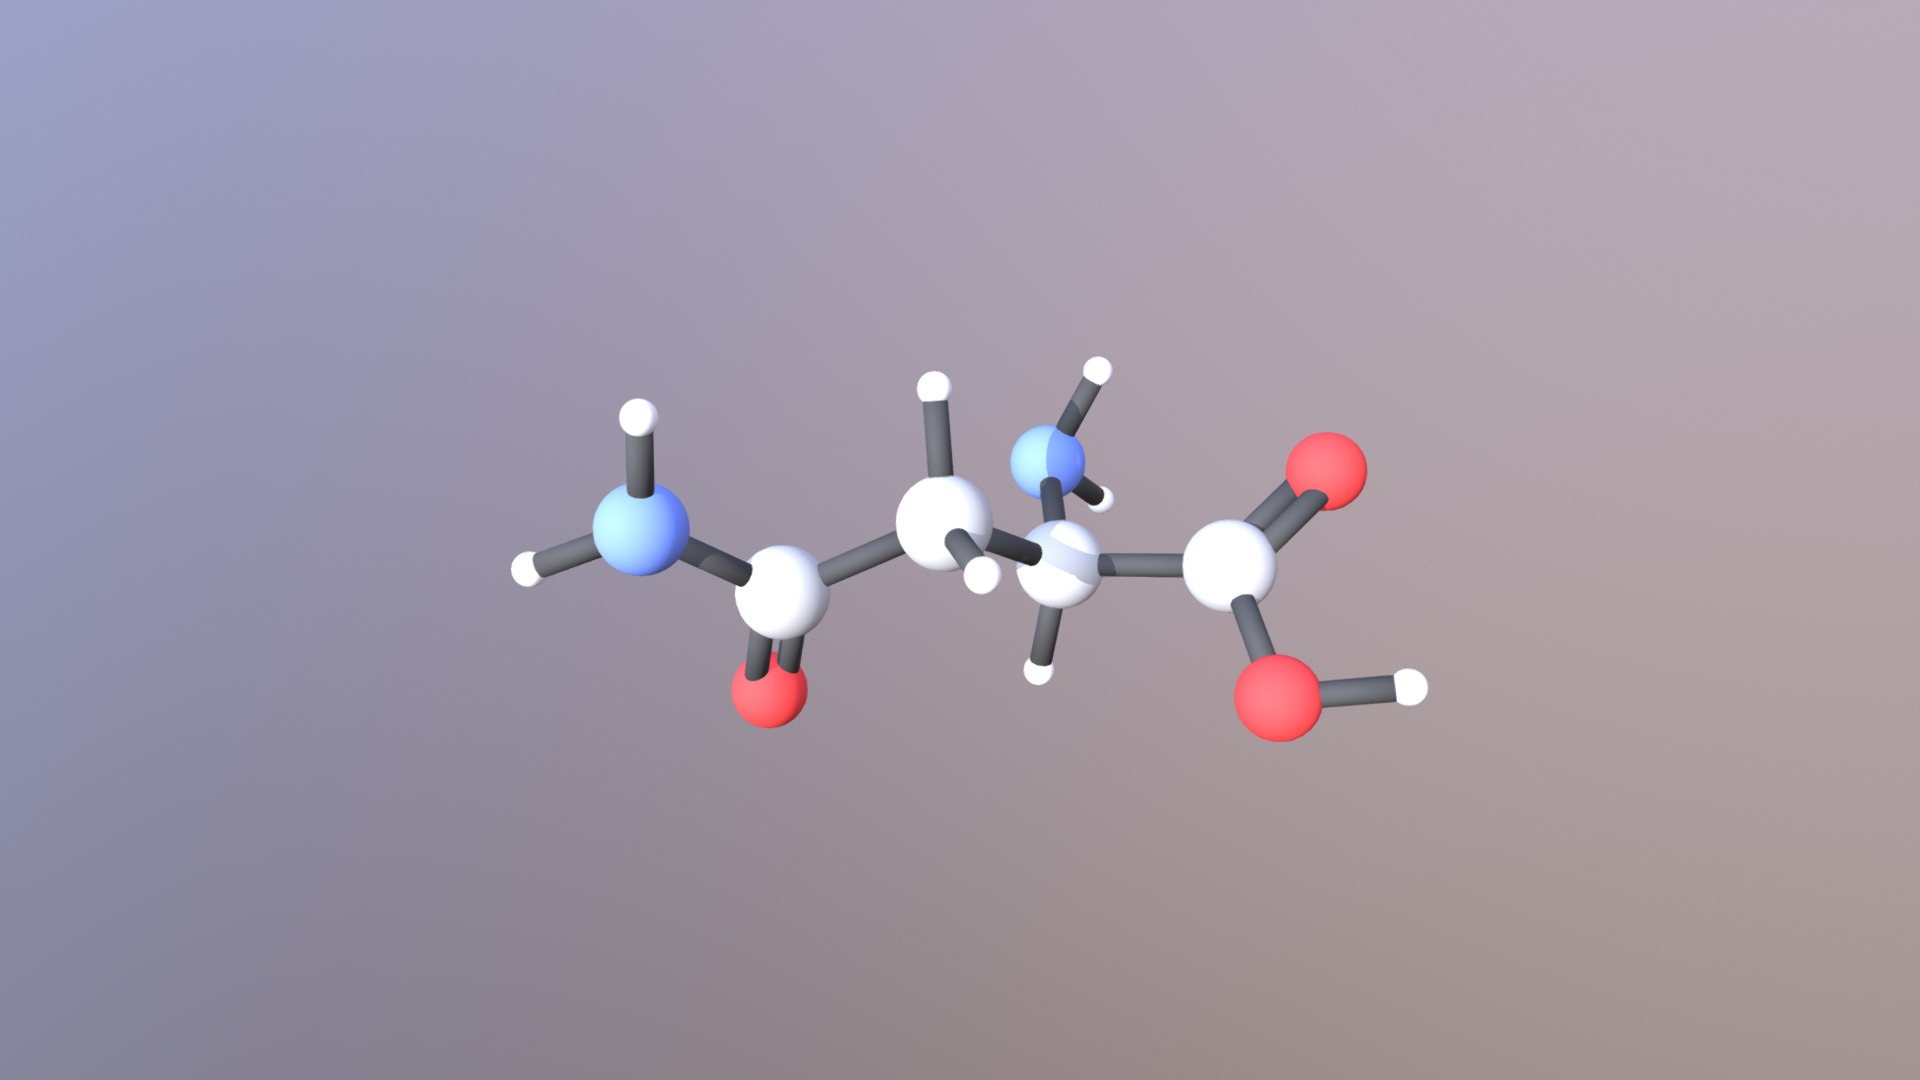 3D model D-asparagine - This is a 3D model of the D-asparagine. The 3D model is about a group of white and red objects.